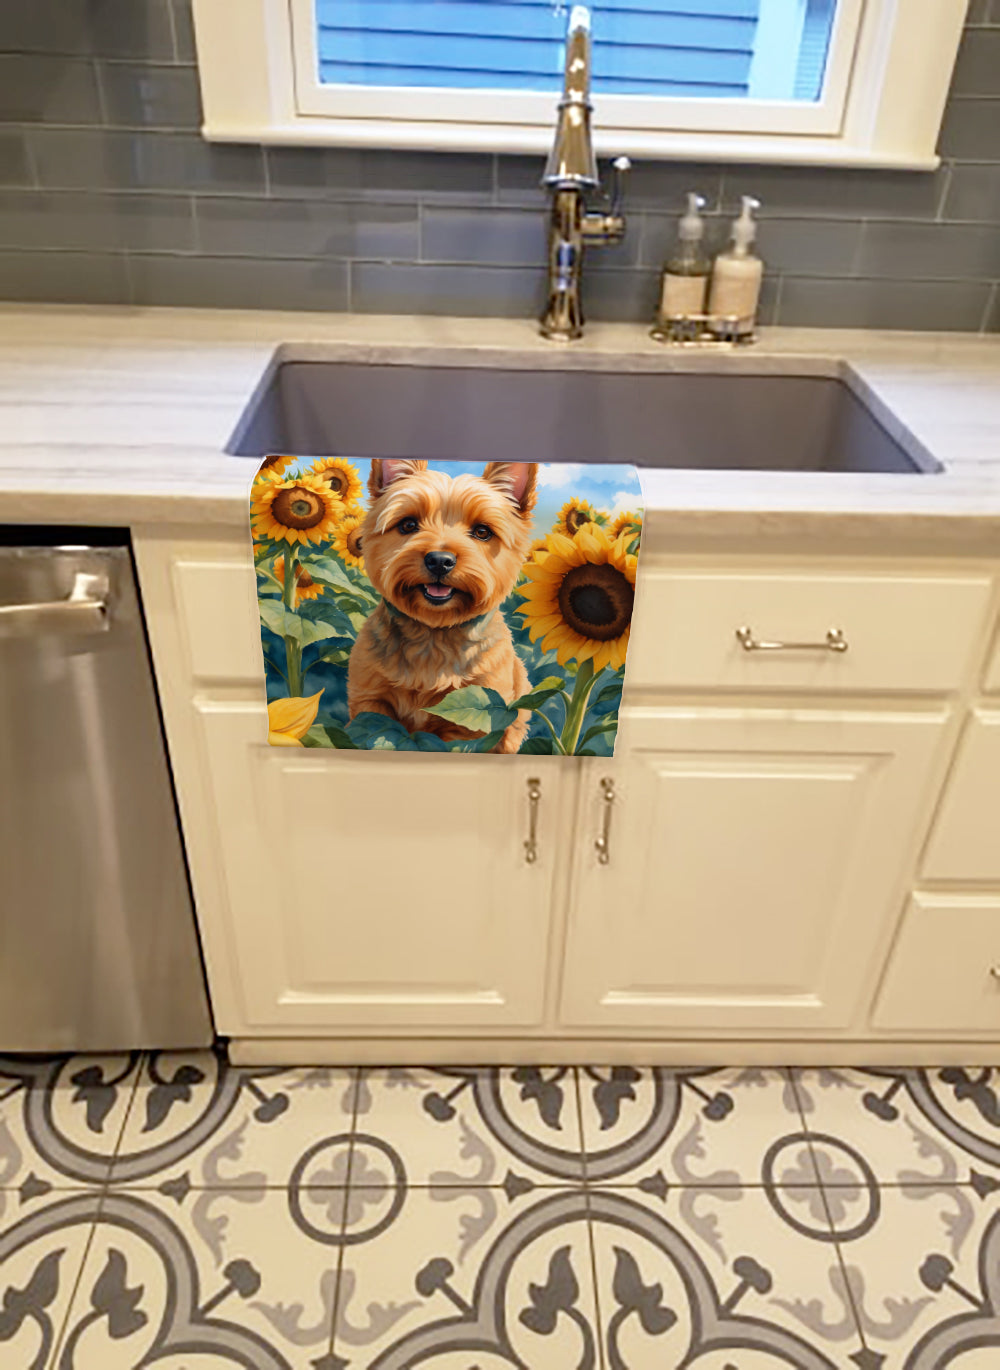 Buy this Norwich Terrier in Sunflowers Kitchen Towel